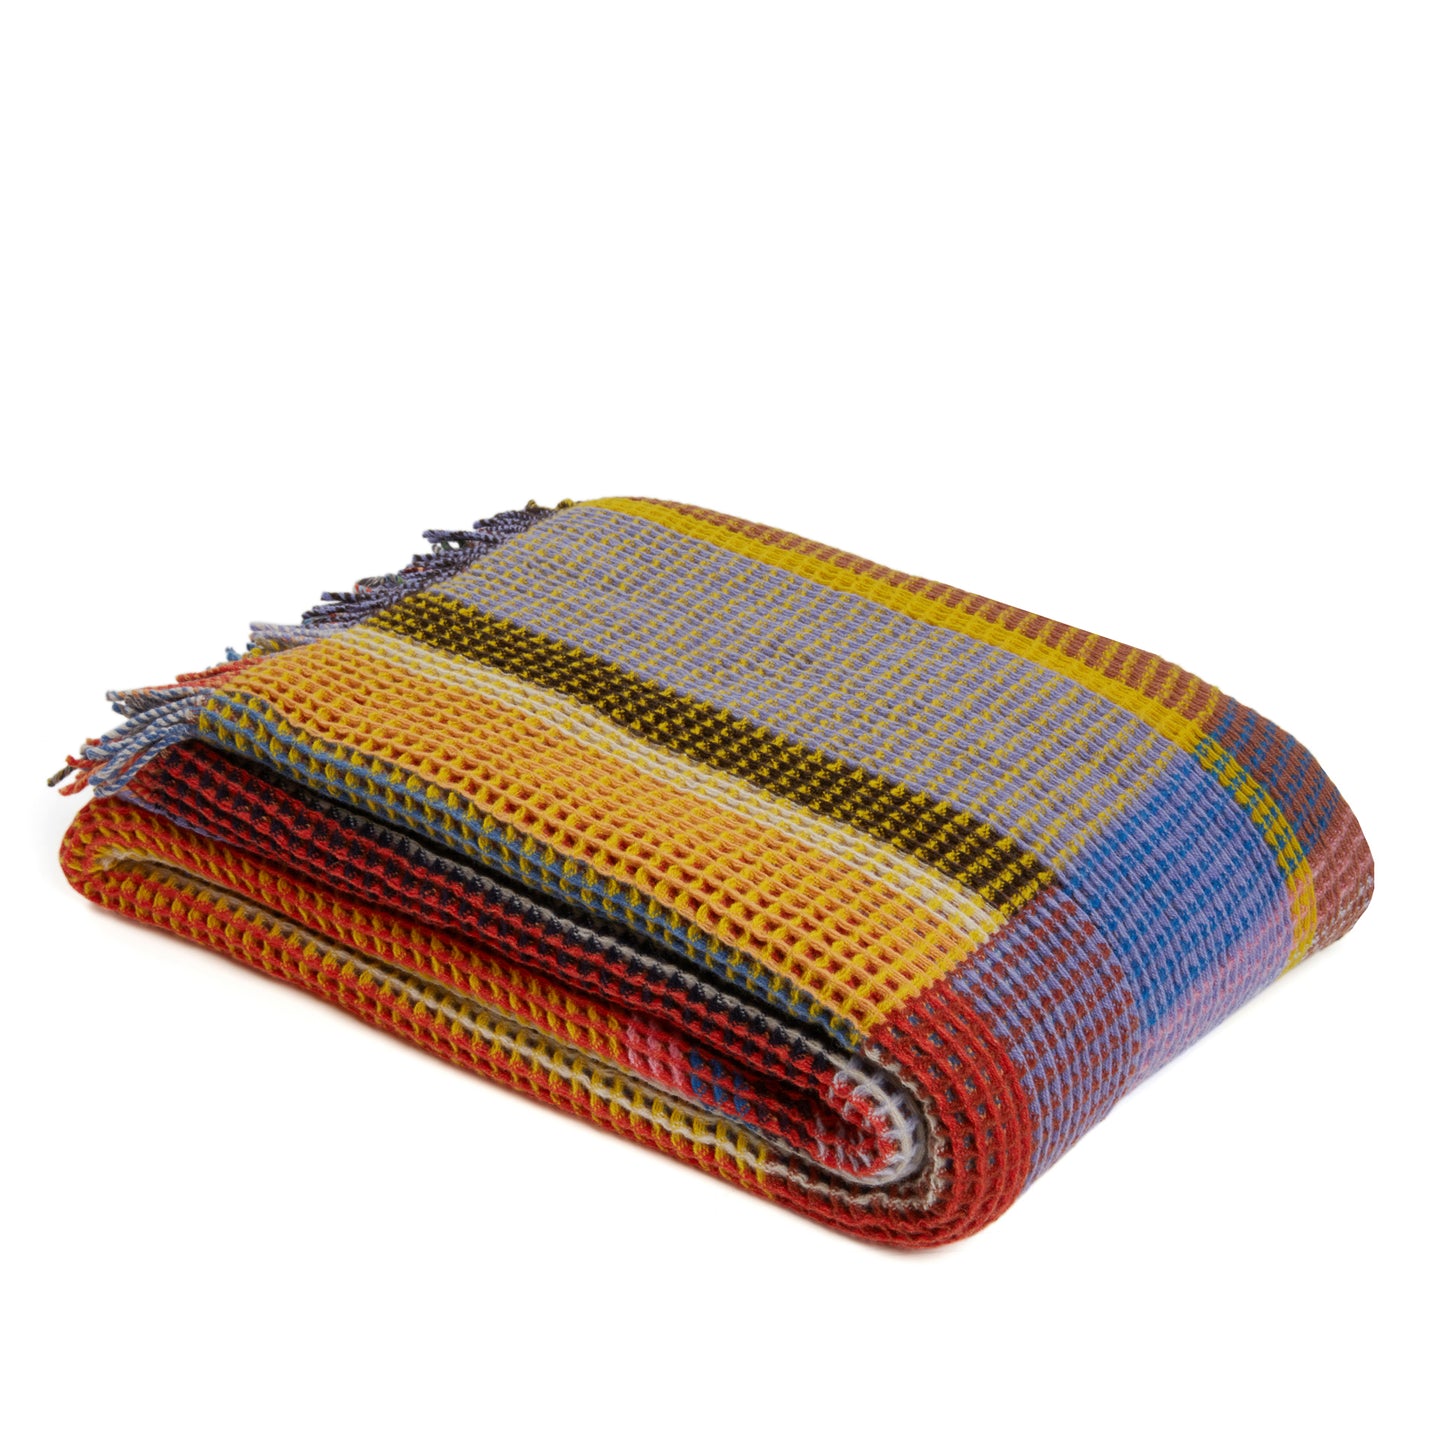 WALLACE+SEWELL - HONEYCOMB THROW - EDITH - LARGE